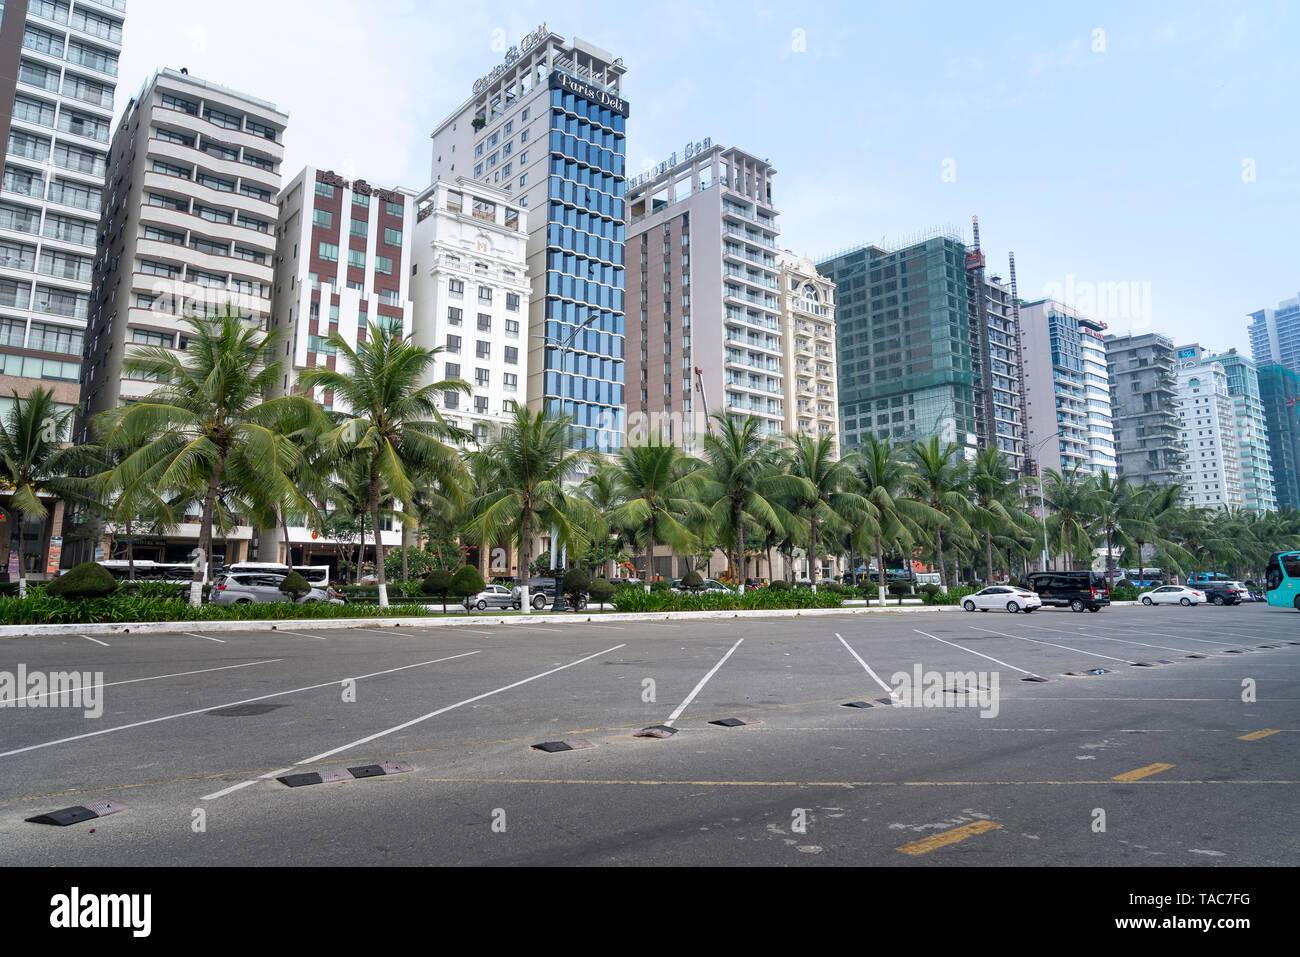 My Khe beach, Da Nang city, Vietnam - April 28, 2019: The seafront road (Vo Nguyen Giap Street) with the row of new multistory hotels on the left and Stock Photo